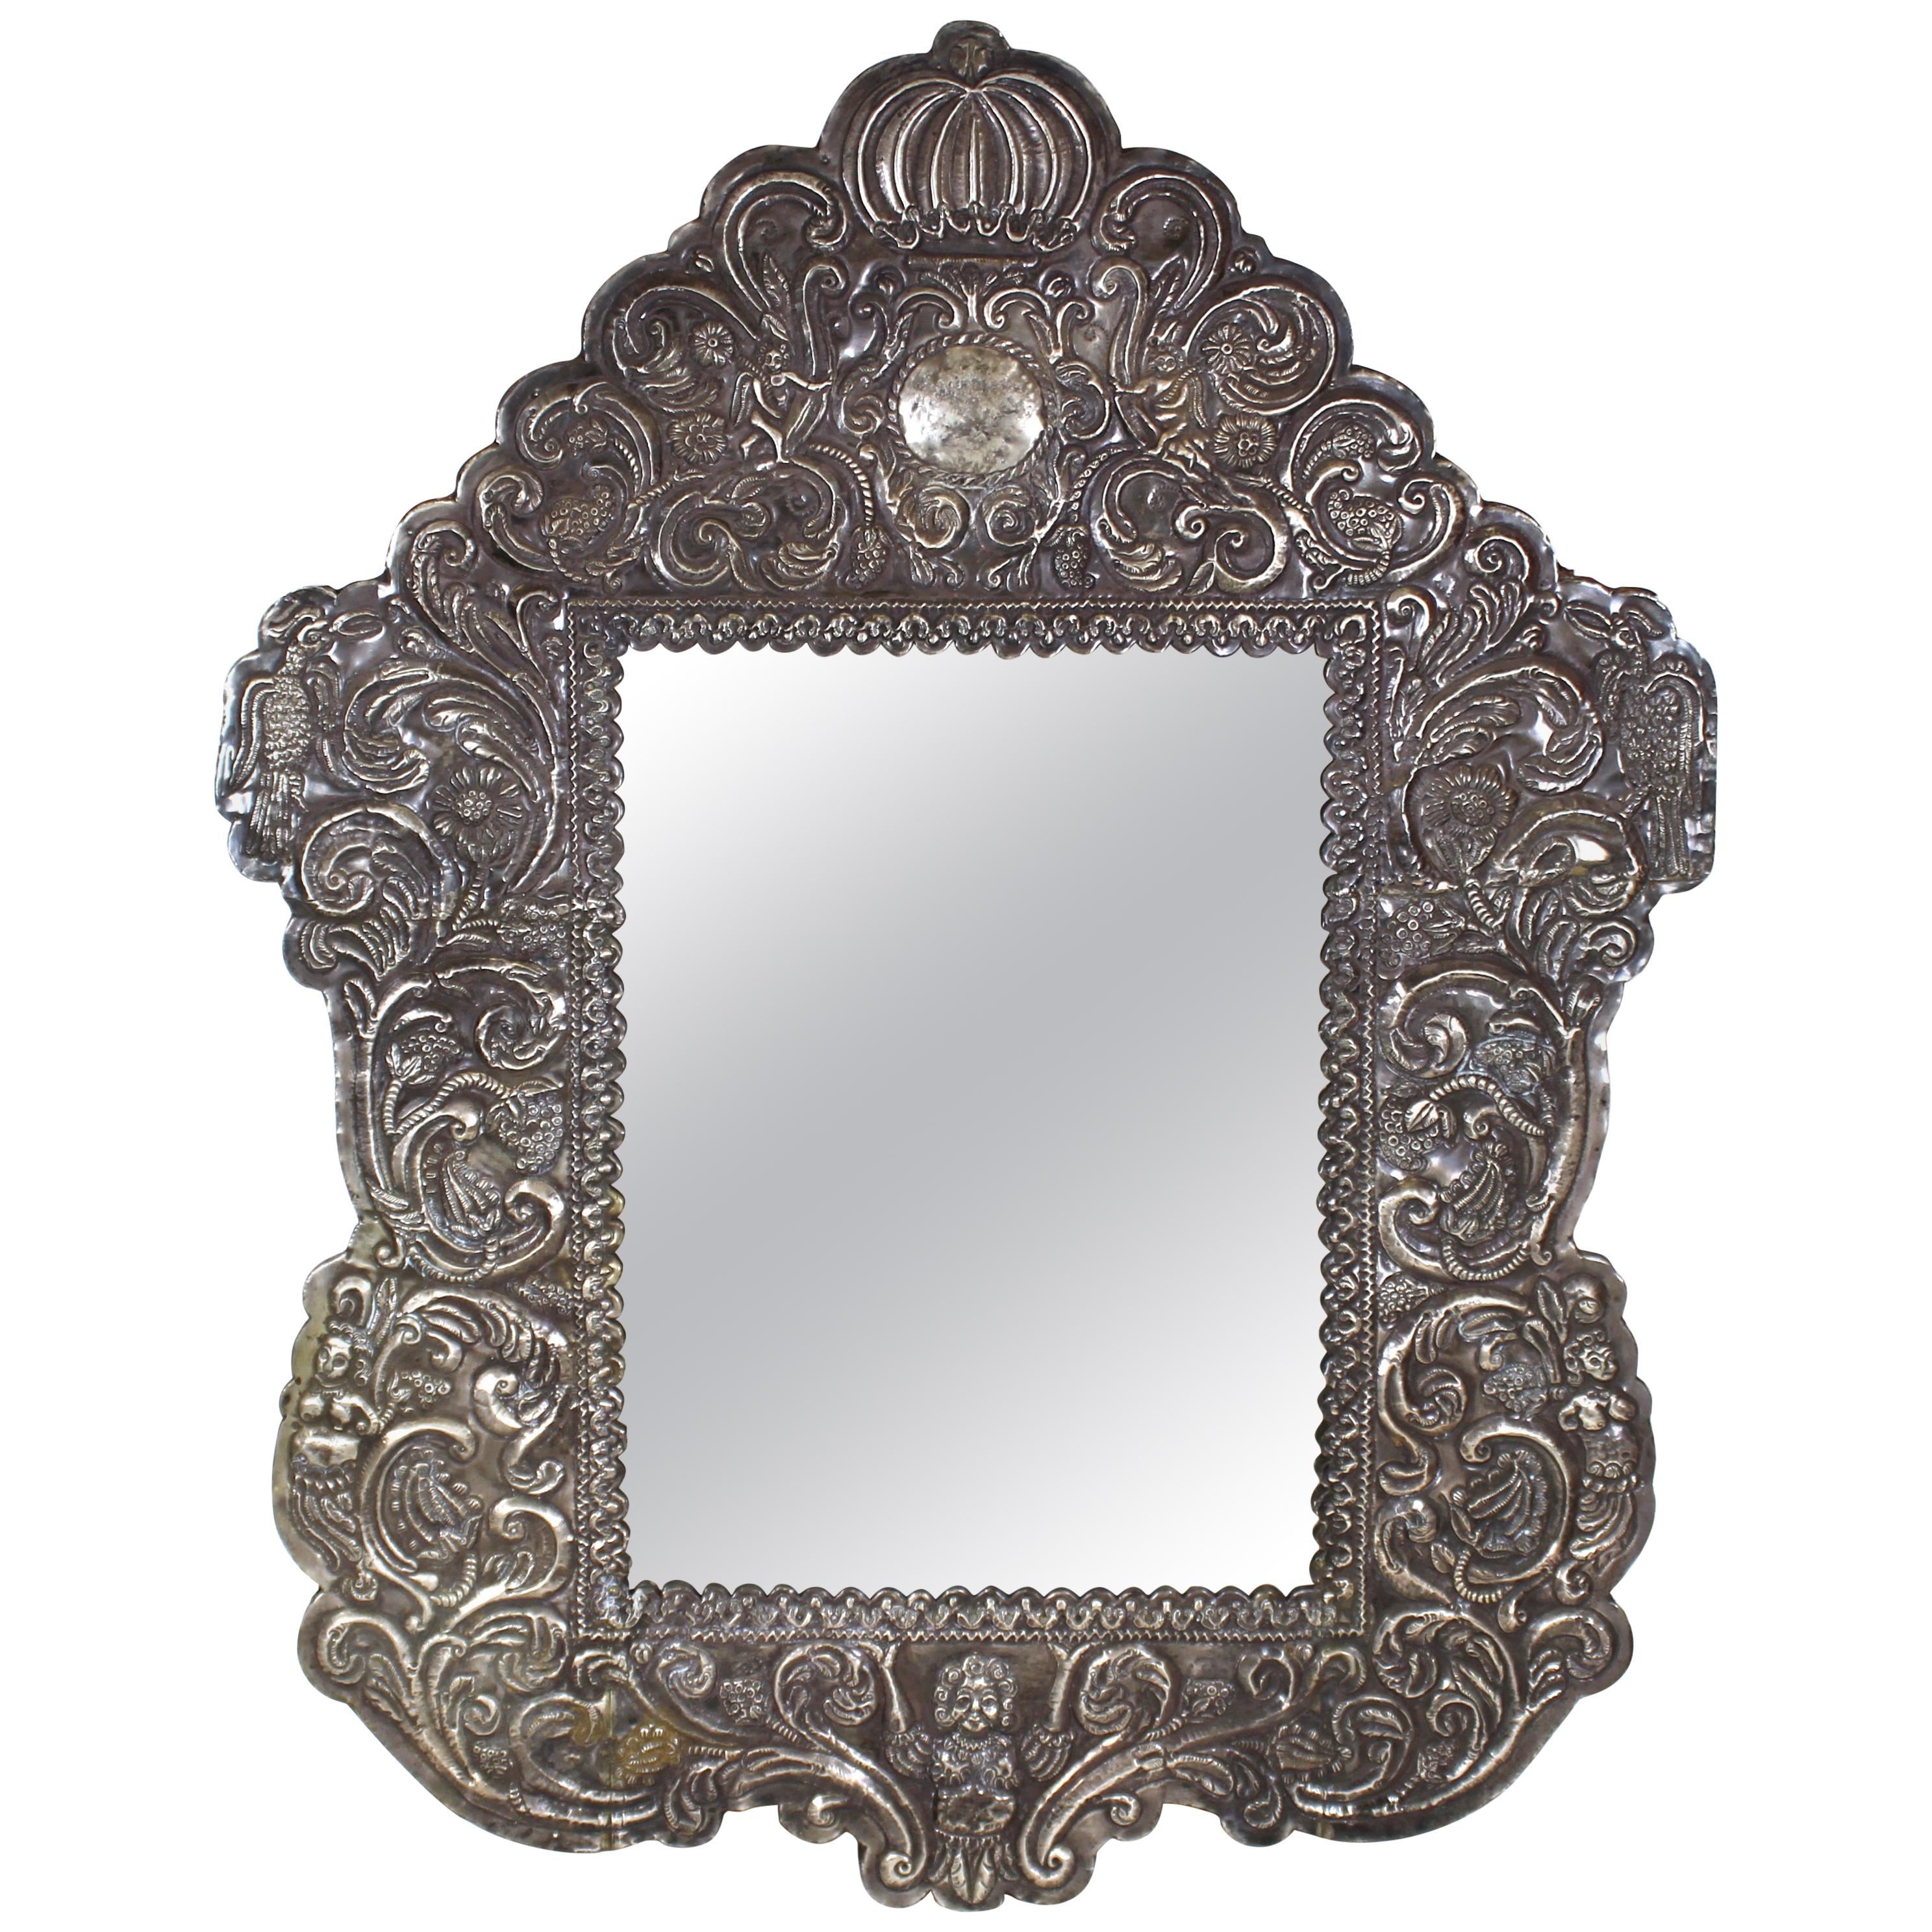 Spanish Colonial Baroque Repoussé Silver Mirror Frame with Allegories